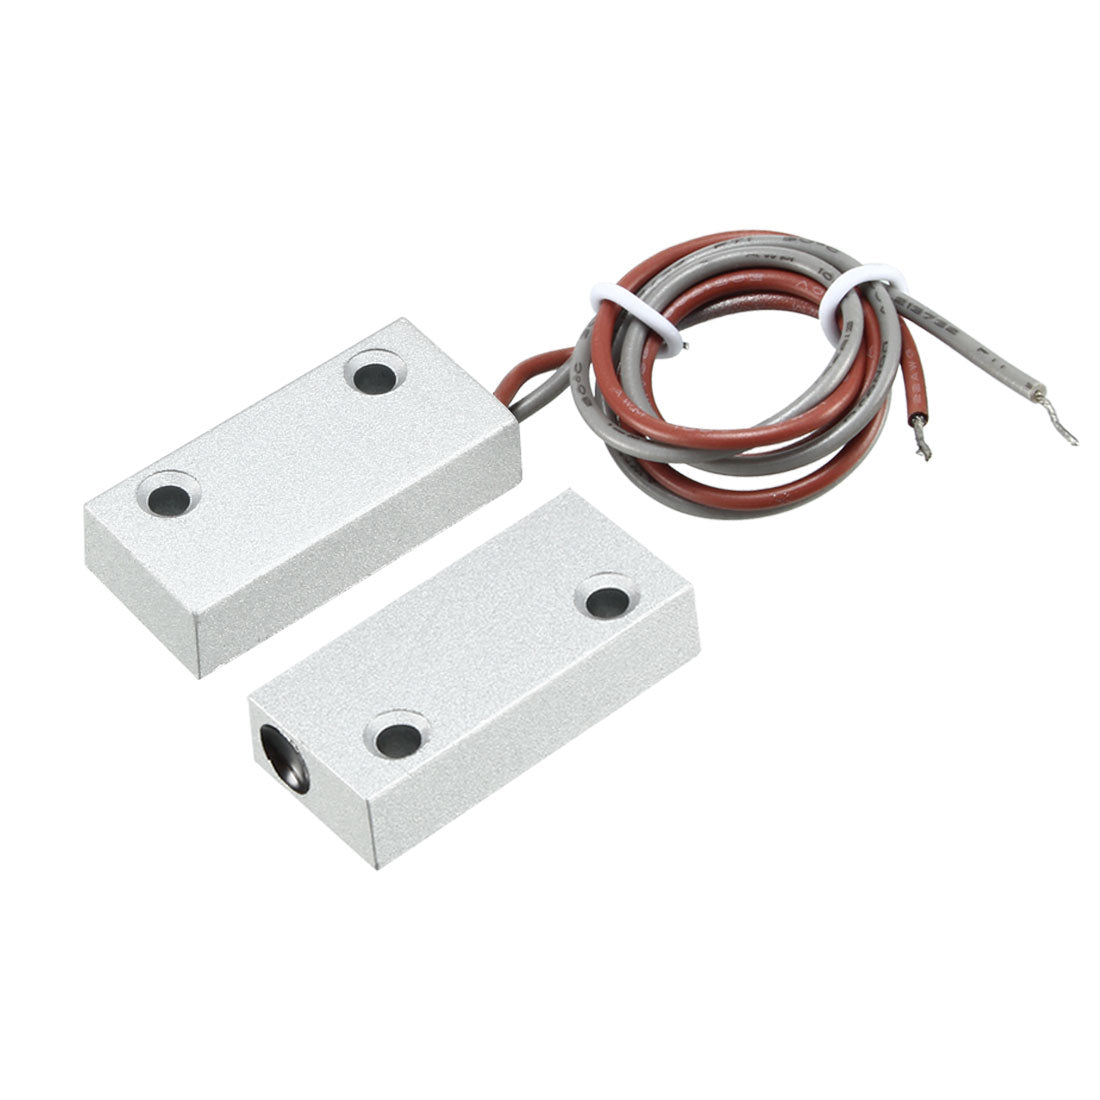 uxcell Uxcell MC-51 NO Alarm Rolling Gate Garage Door Contact Magnetic Reed Switch Silver Gray